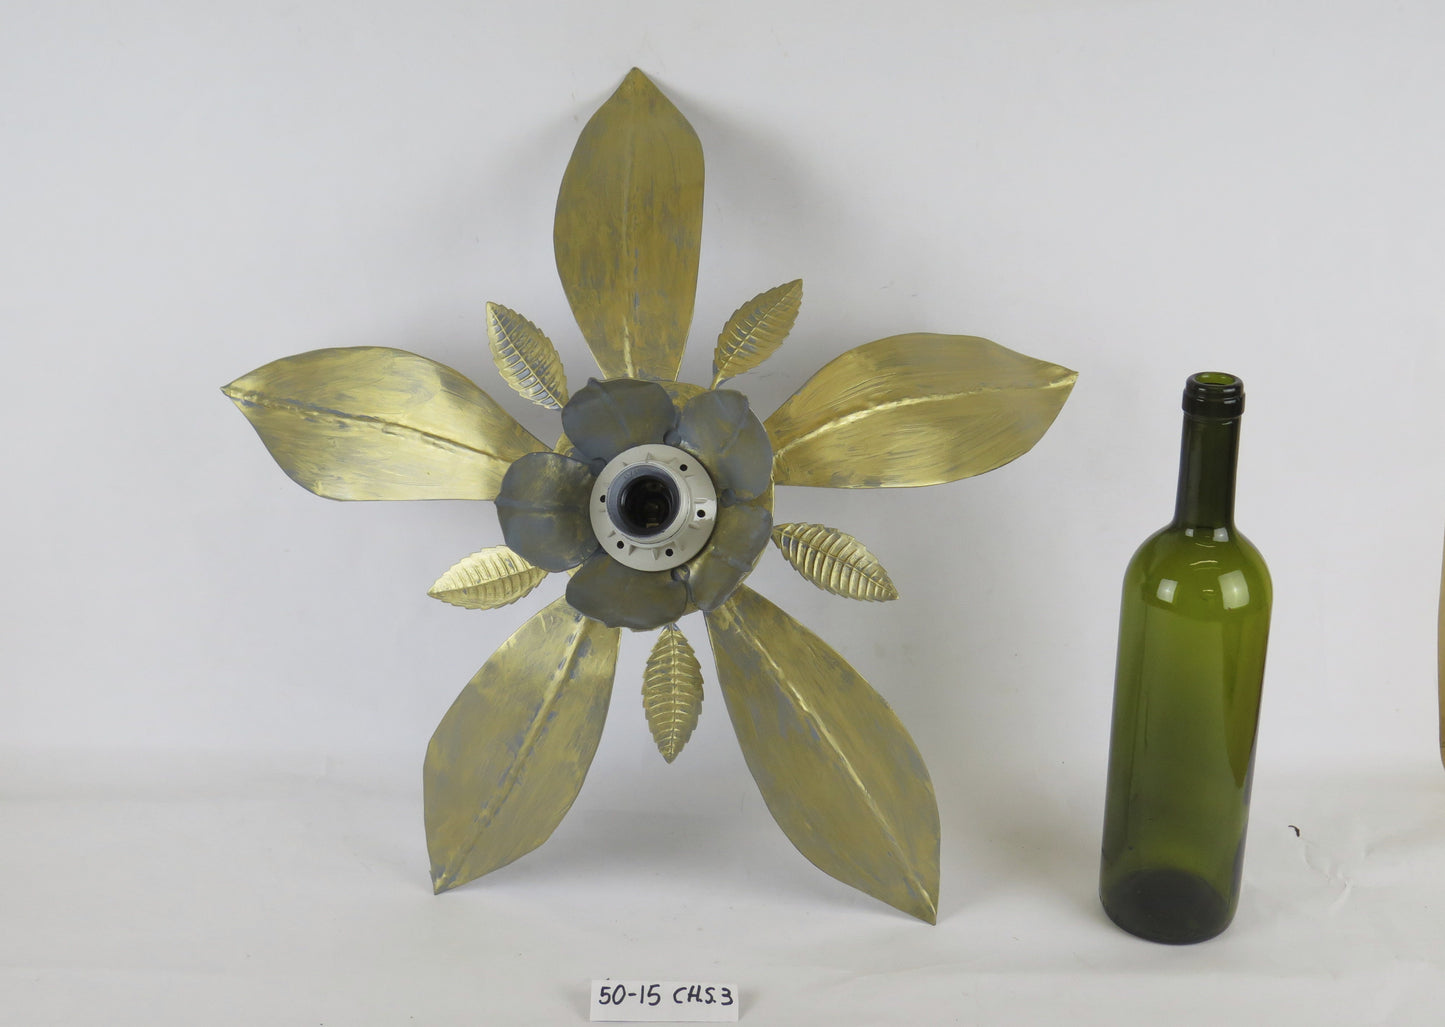 VINTAGE WALL LAMP DESIGN CHANDELIER CEILING LIGHT WROUGHT IRON FLOWER SHAPE CH.S.3